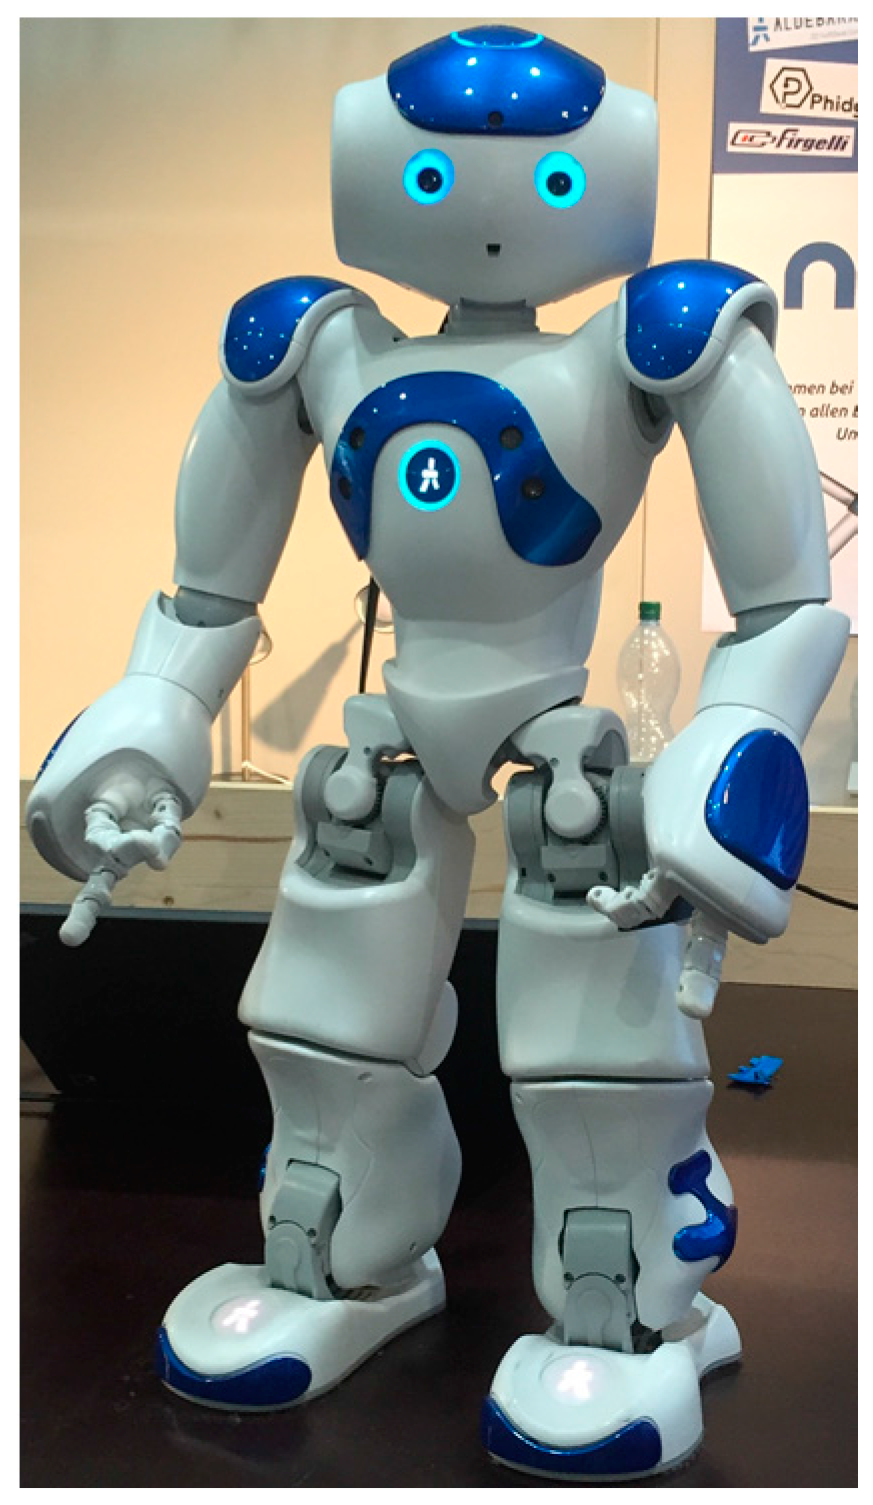 MTI | Free | Form, Function and Etiquette–Potential Users' on Social Domestic Robots